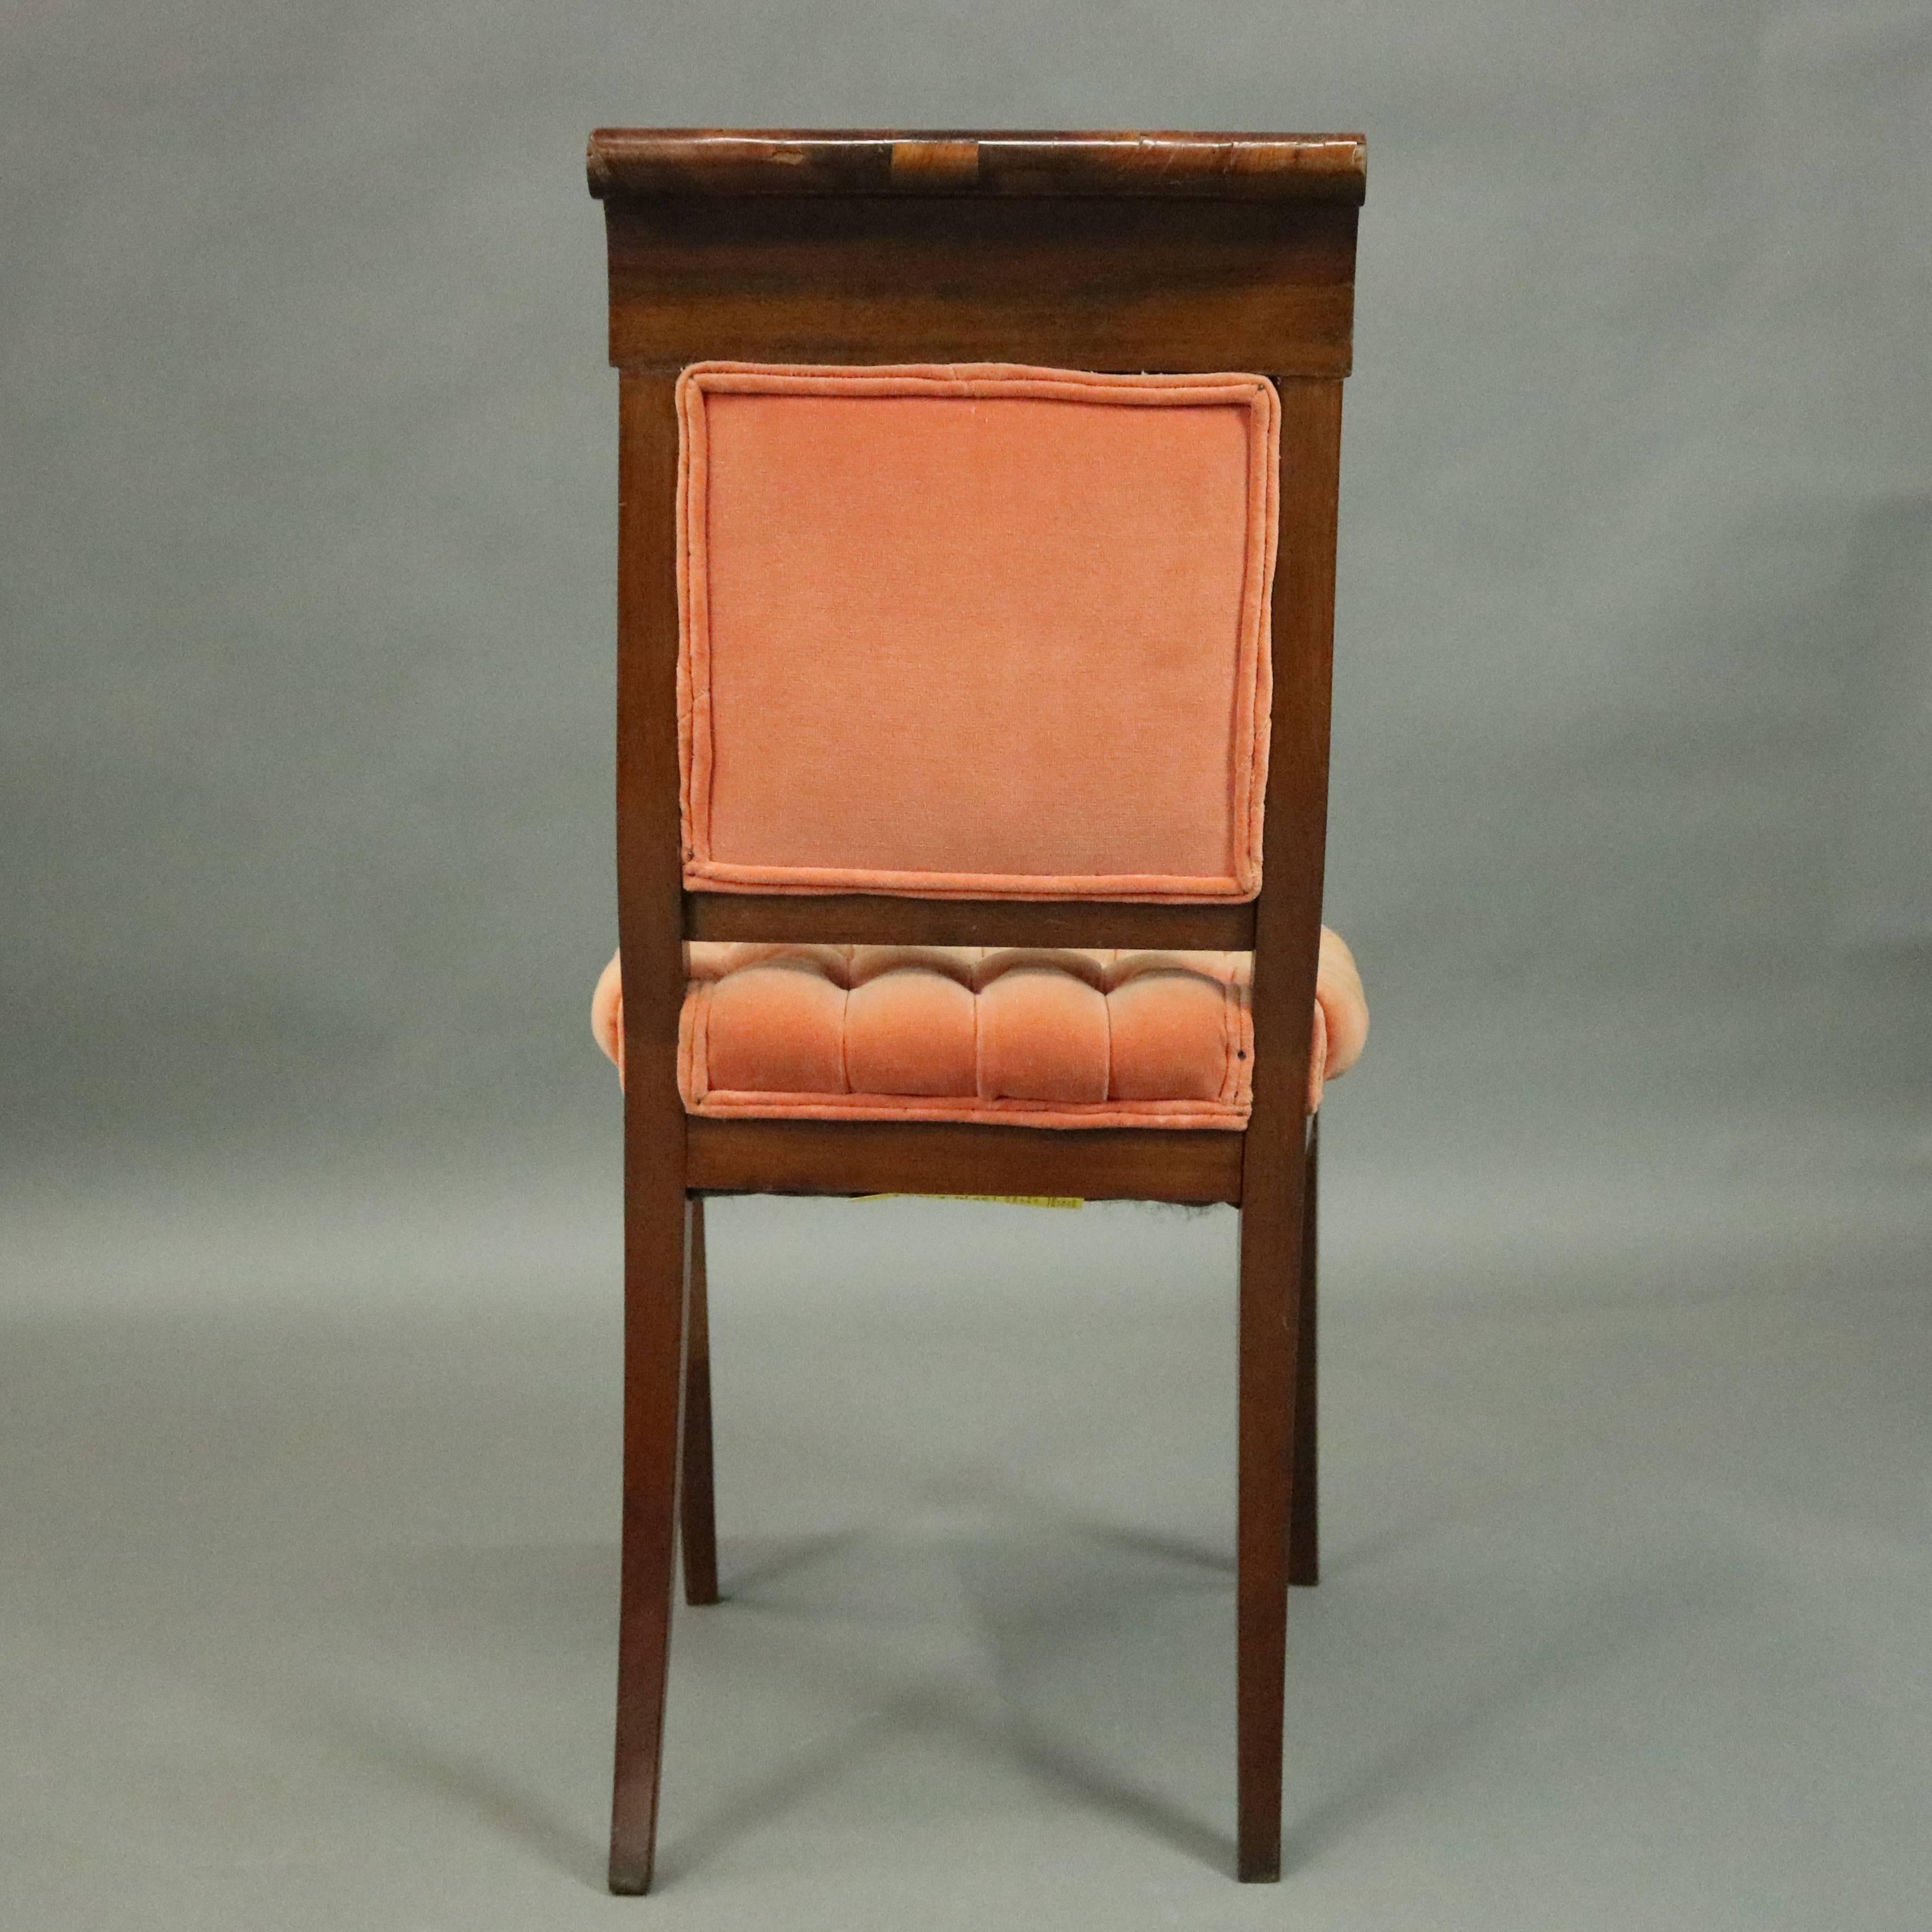 19th Century Dutch Marquetry Upholstered Mahogany Side Chair with Foliate Inlay, circa 1890